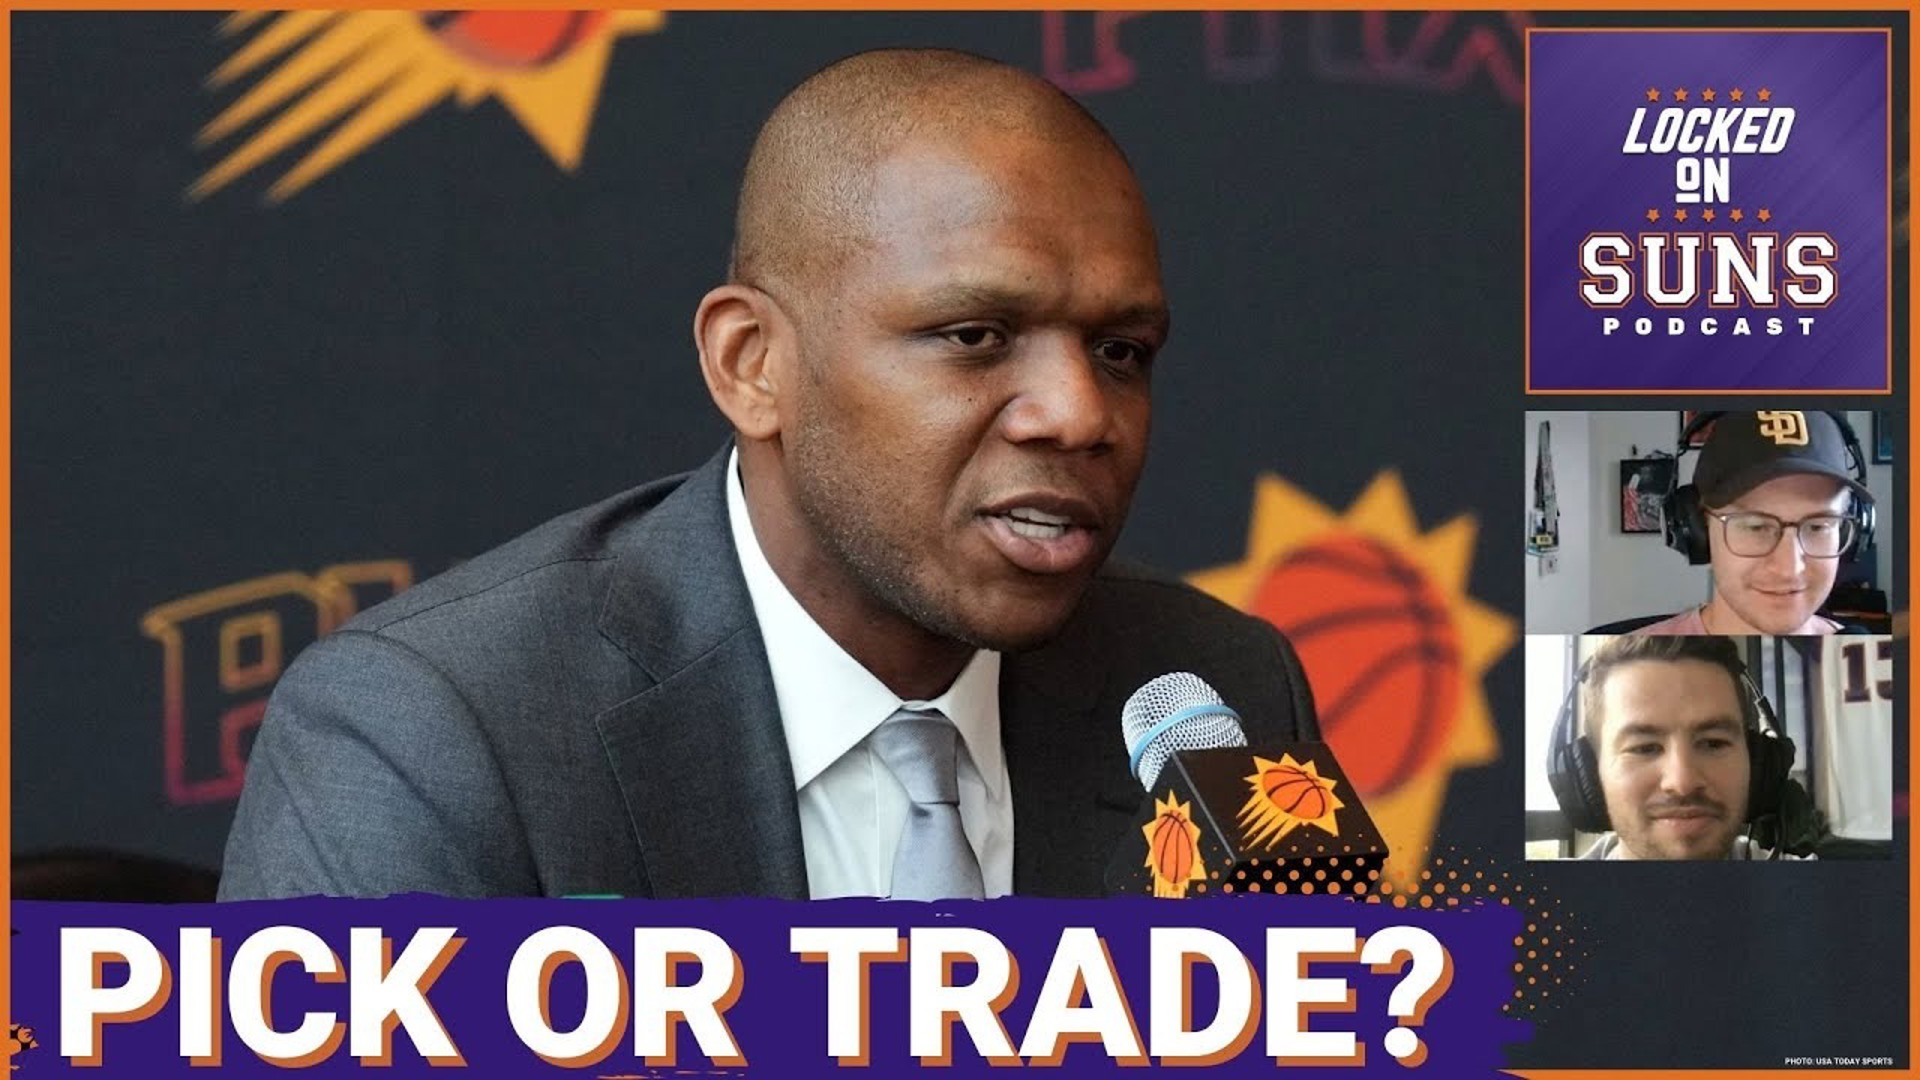 The Phoenix Suns have many options this week in the NBA Draft, from selecting a player to trading up, down or out completely. What will they do?